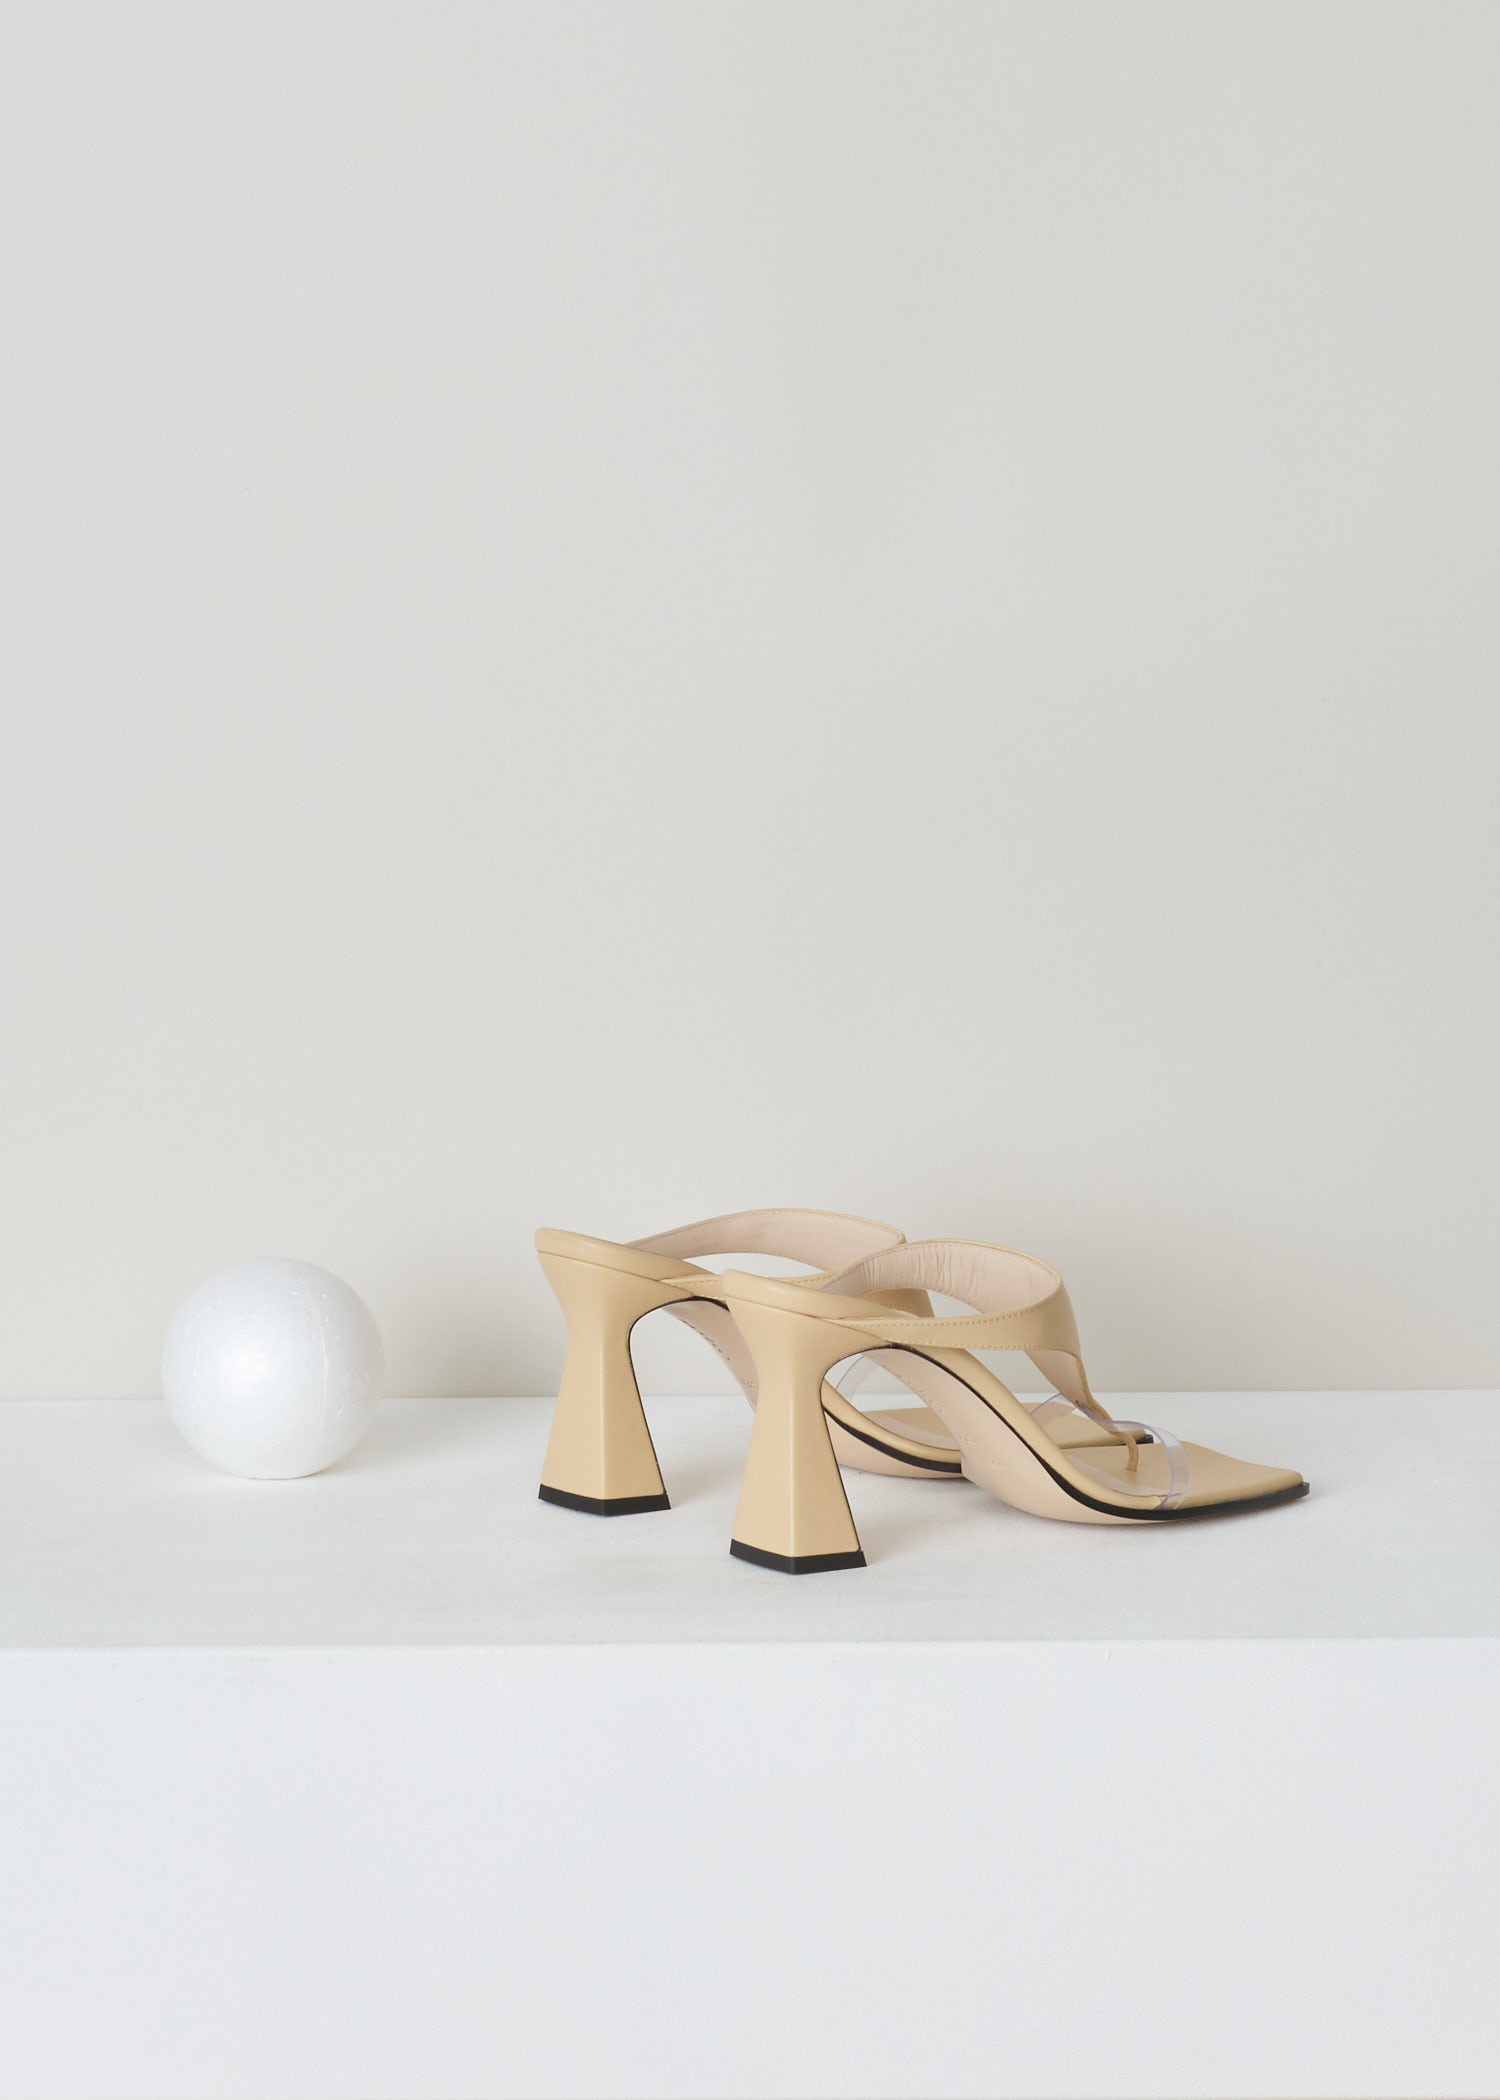 Wandler, Lambskin cashew sandal, Feline_Sandal_Lambskin_Leather_Cashew, beige, back, Lambskin mules, comes in cashew color. Featuring square-cut open toes and lightly padded straps for extra comfort.